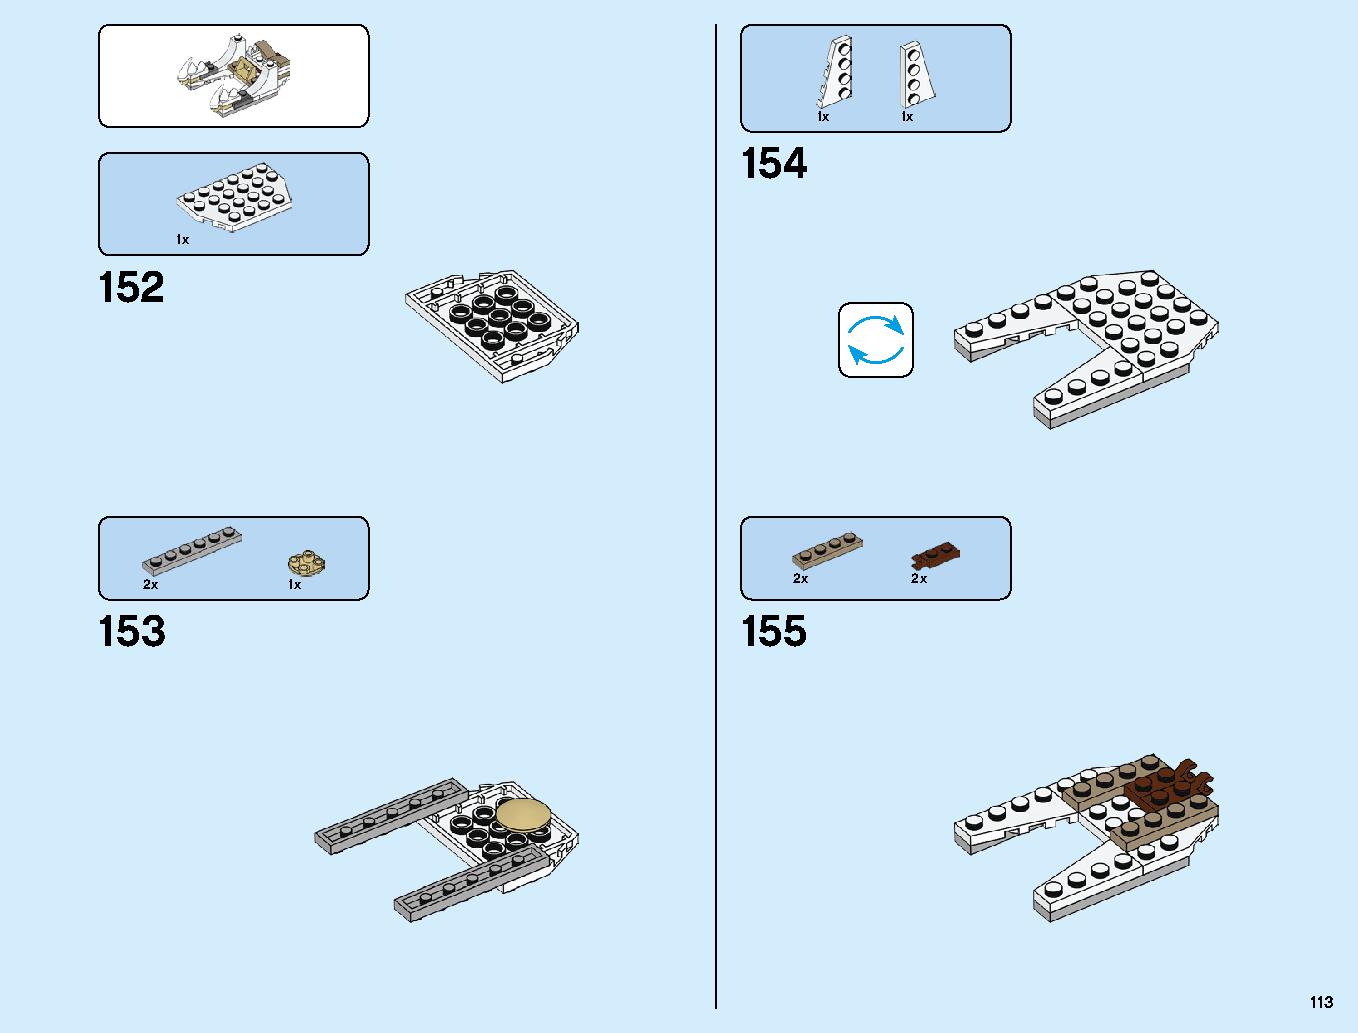 Dragon Pit 70655 LEGO information LEGO instructions 113 page